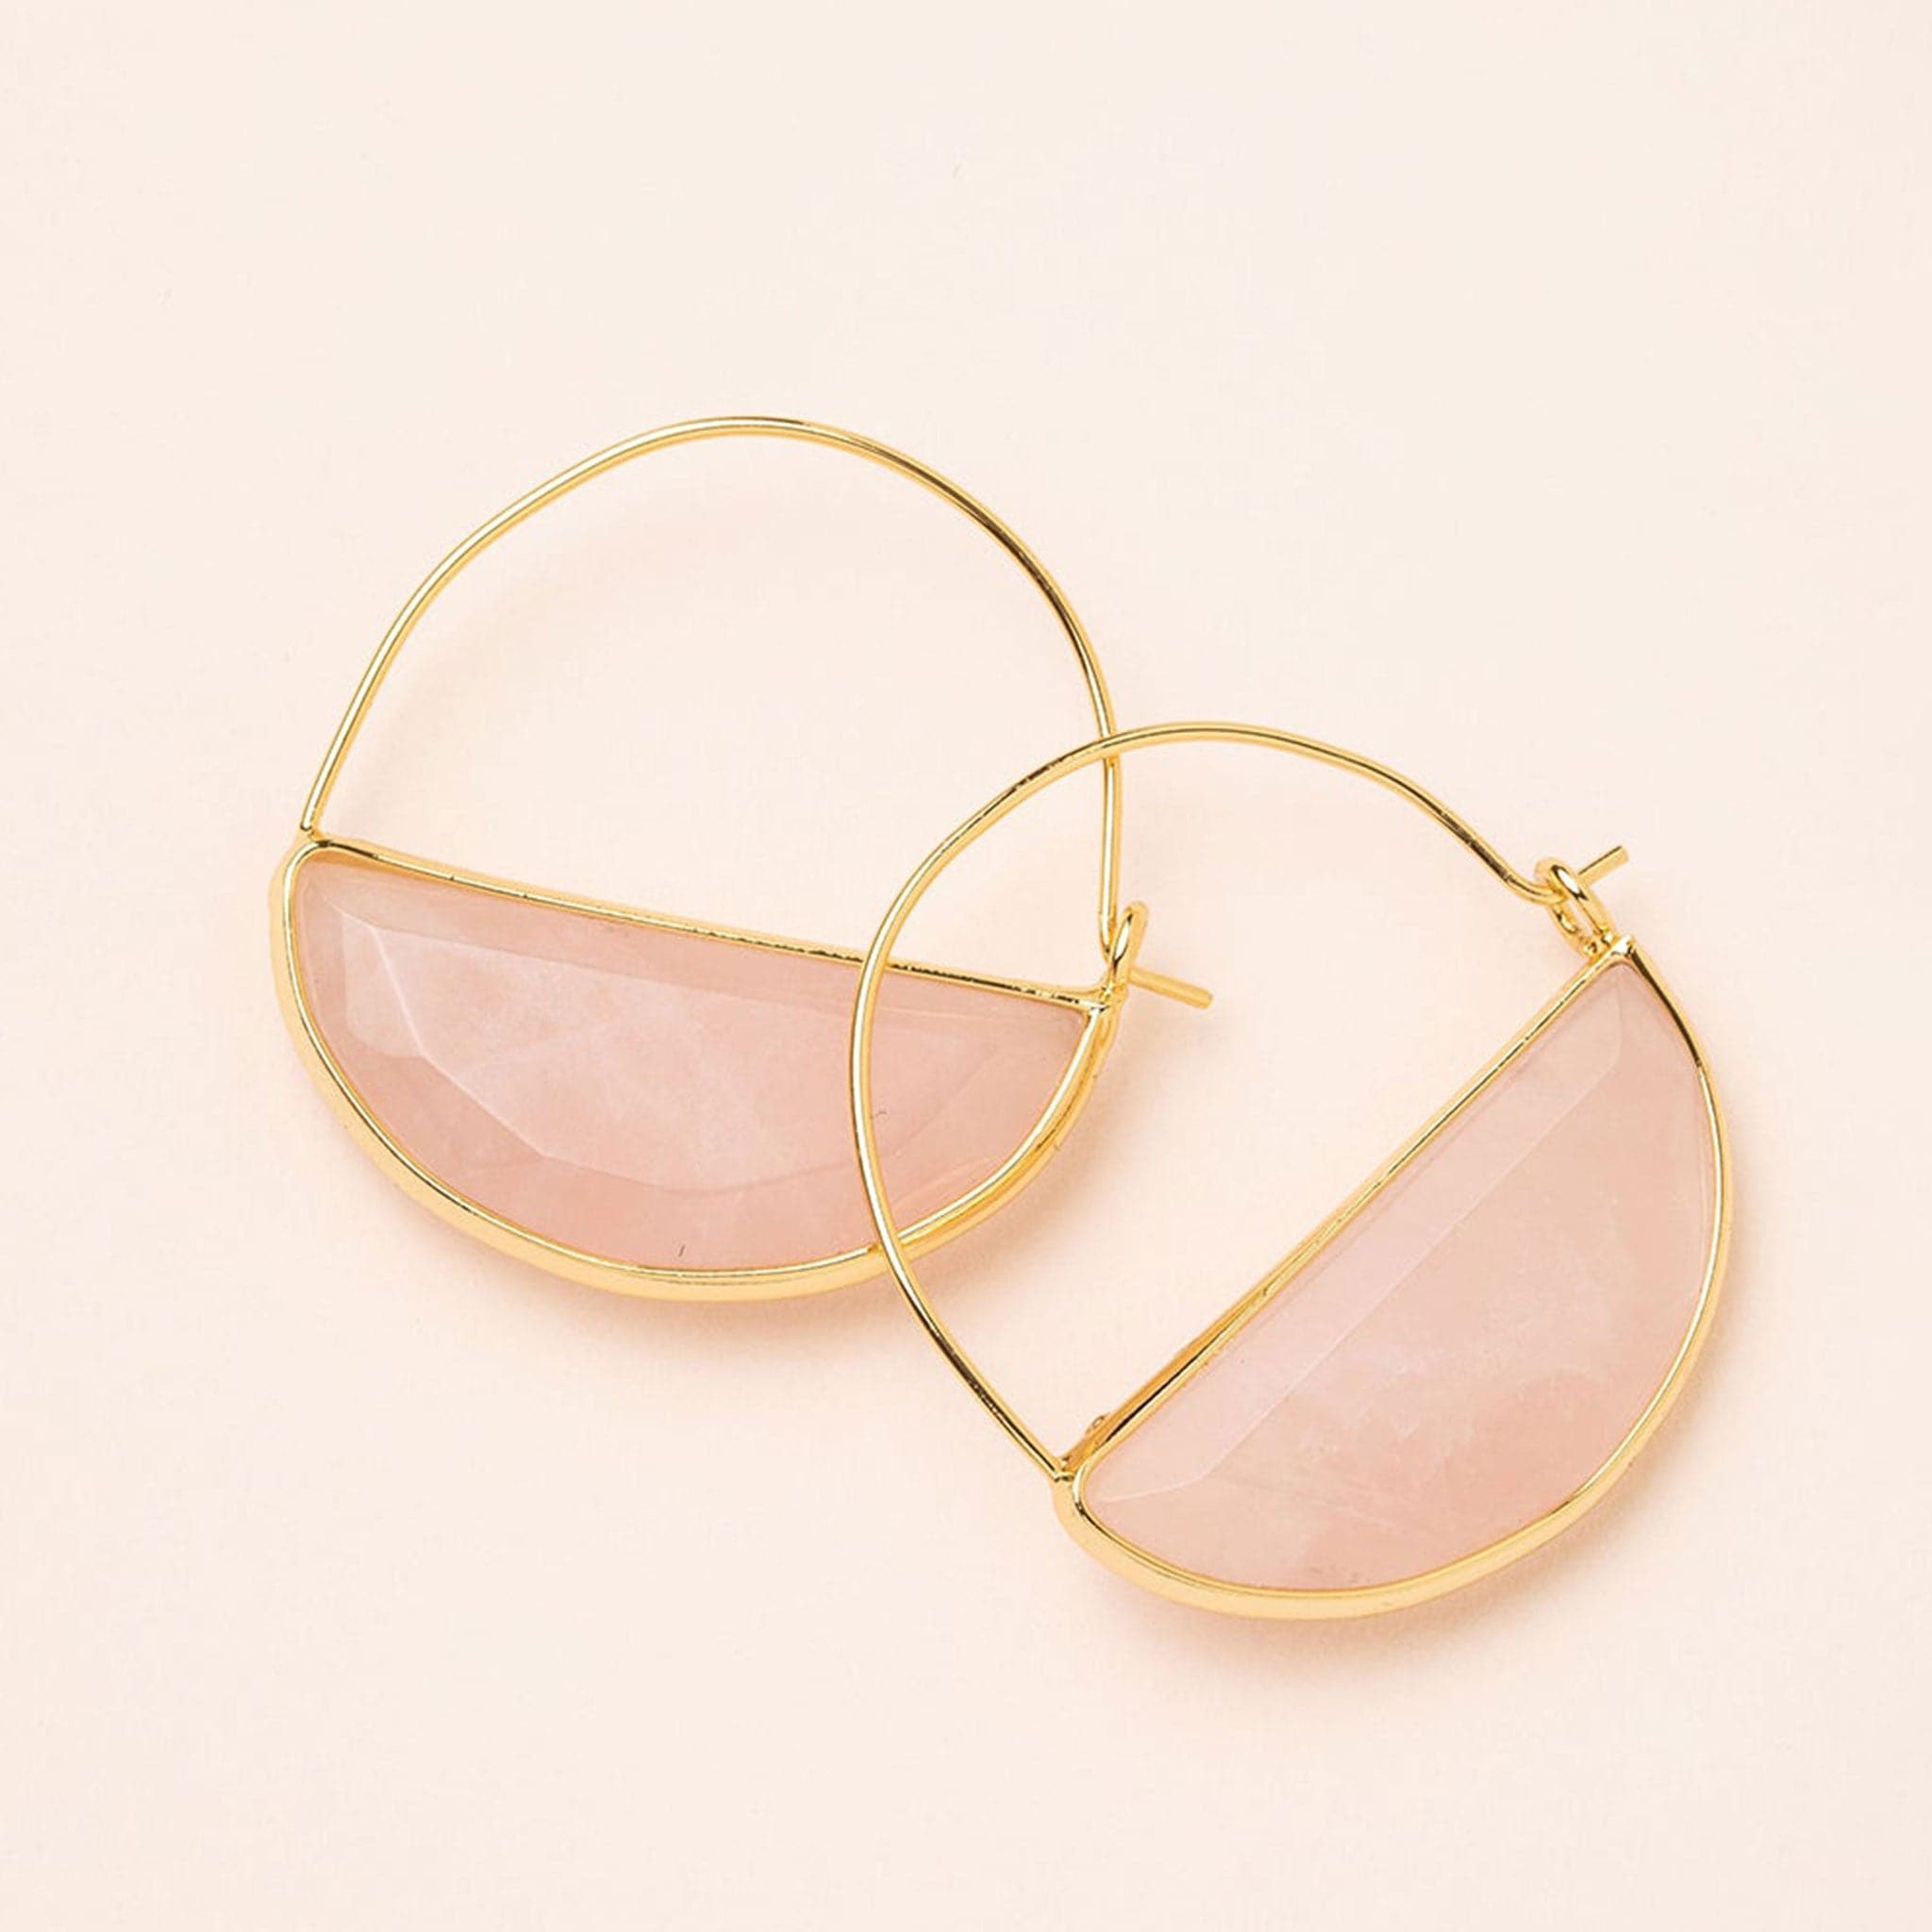 In front of a cream background is a pair of gold earrings. The top is a thin gold hoop. The bottom is a rose quartz half circle with a gold border. 